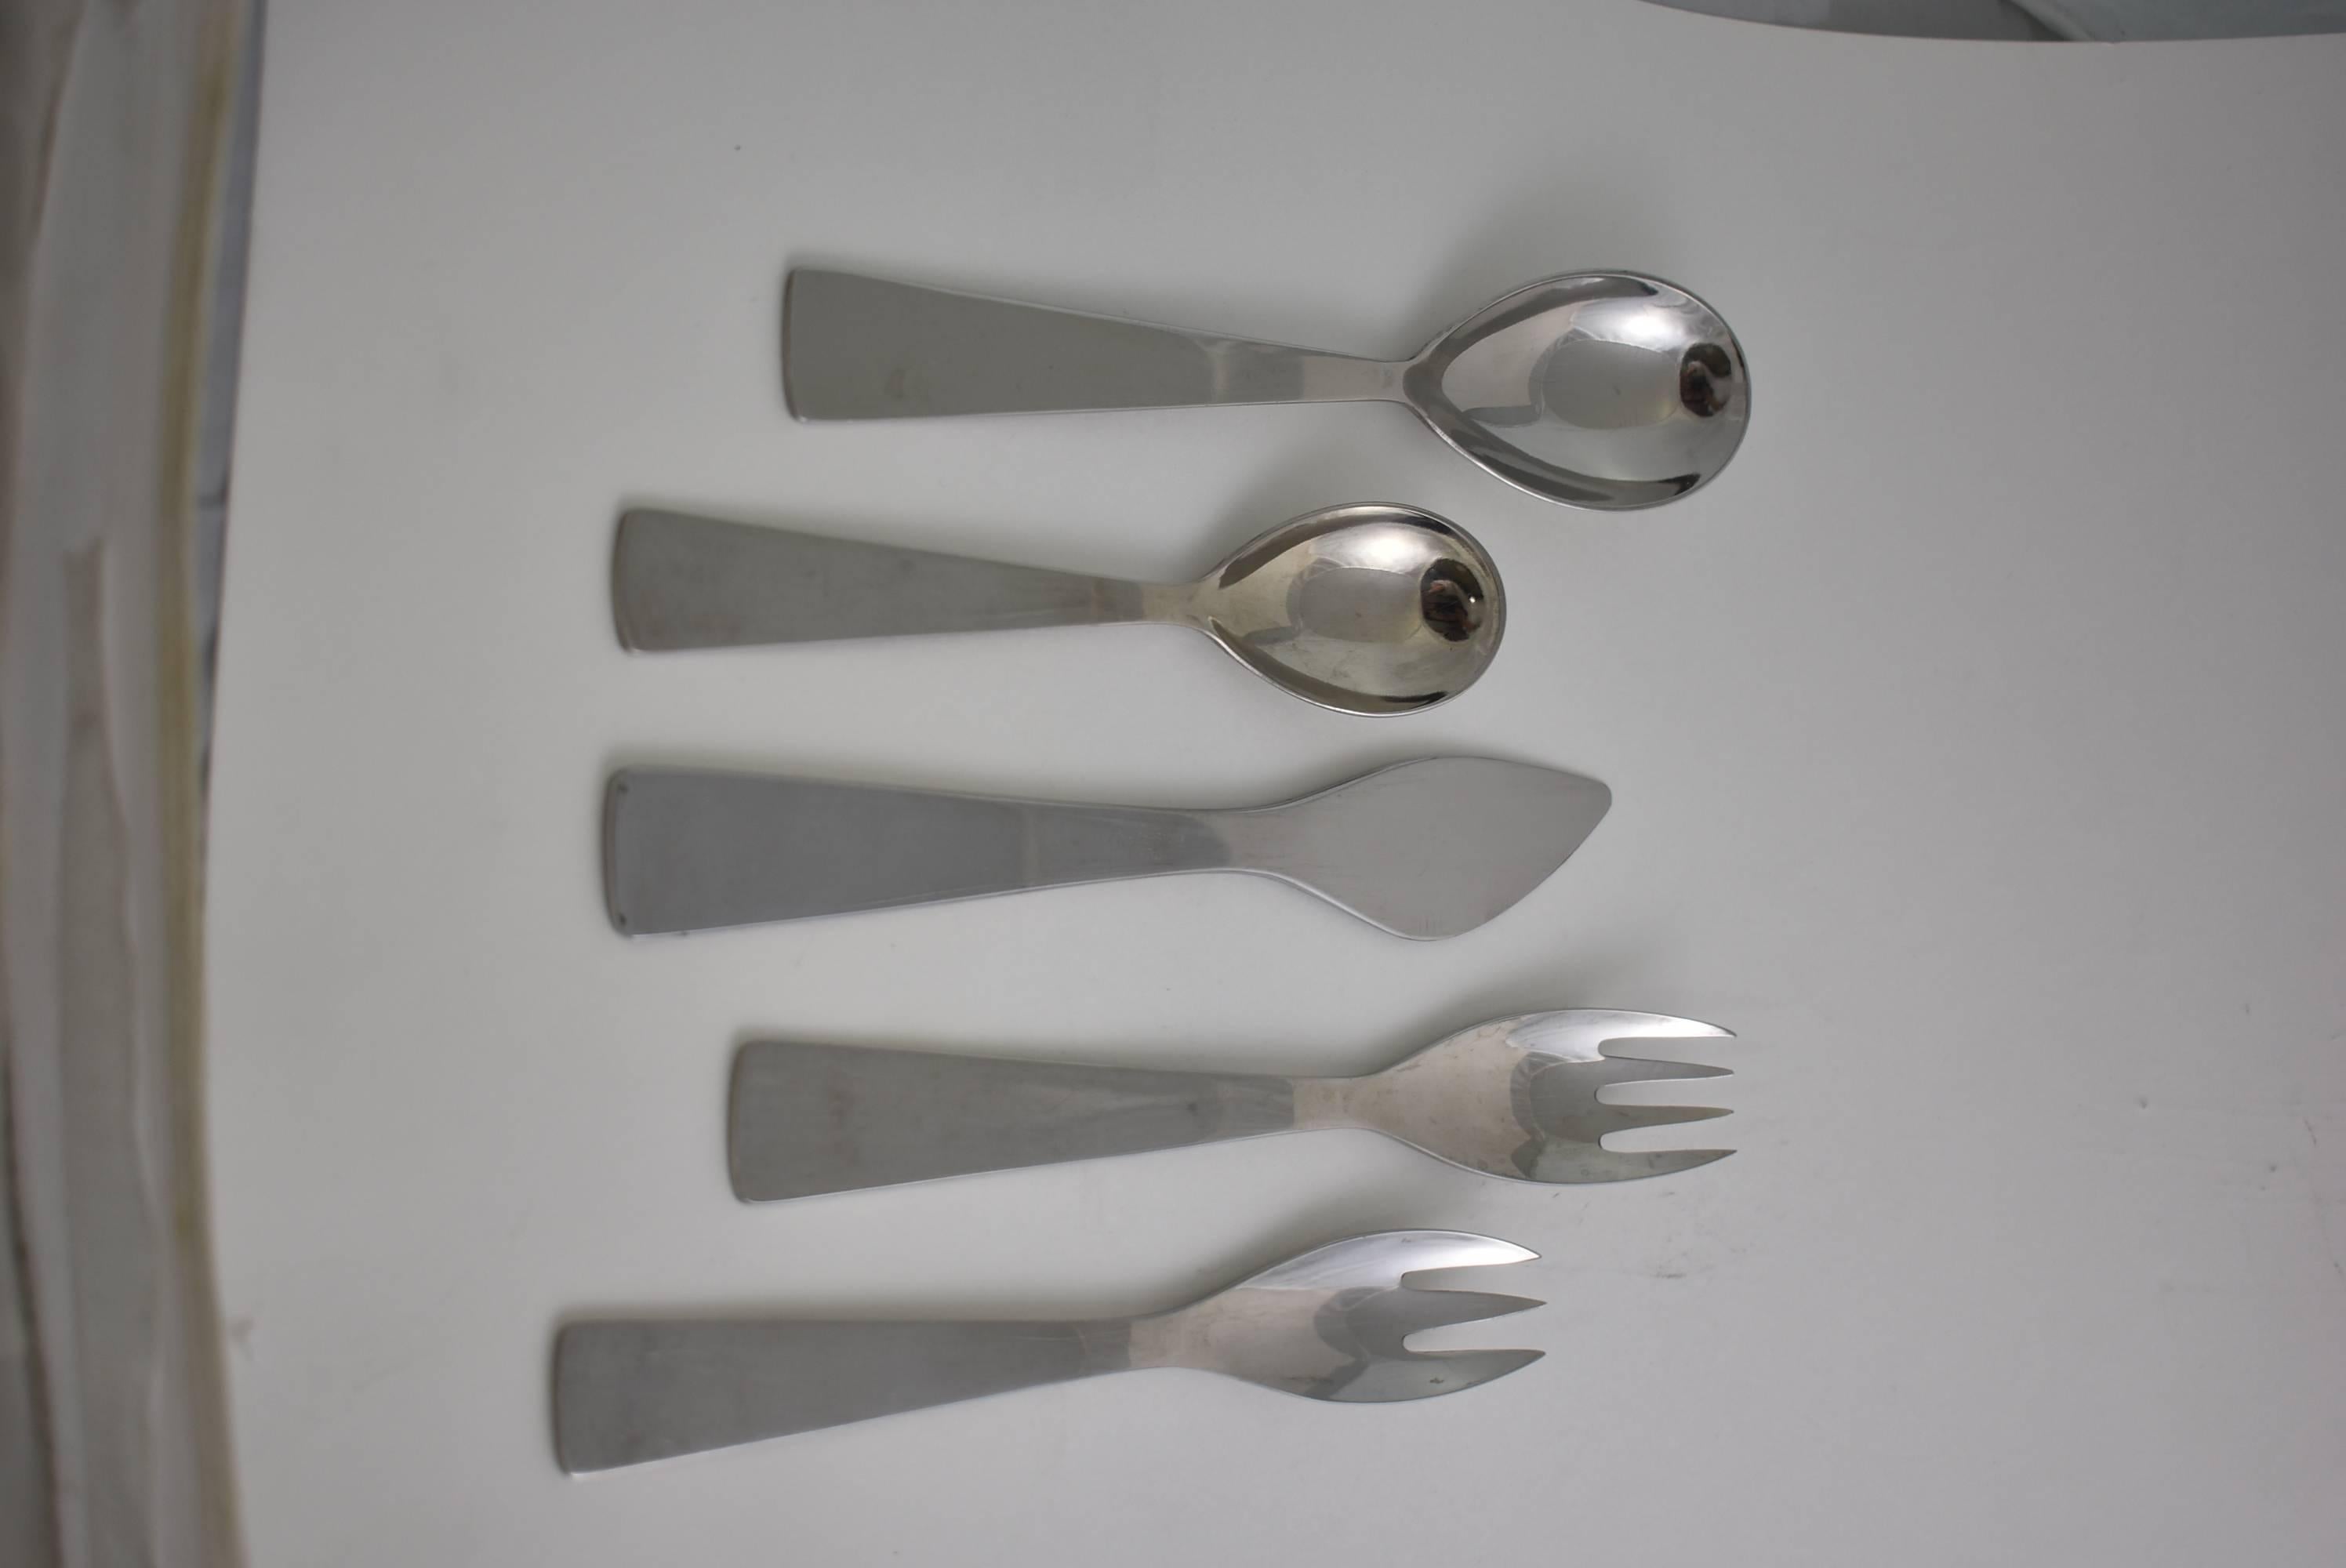 Mid-Century Modern stainless flatware, circa 1950s by Gio Ponti for Fraser Krupp. Made in Italy. Twelve place settings consisting of two forks, two spoons and a knife. Overall light wear from age and use. Large spoon 7